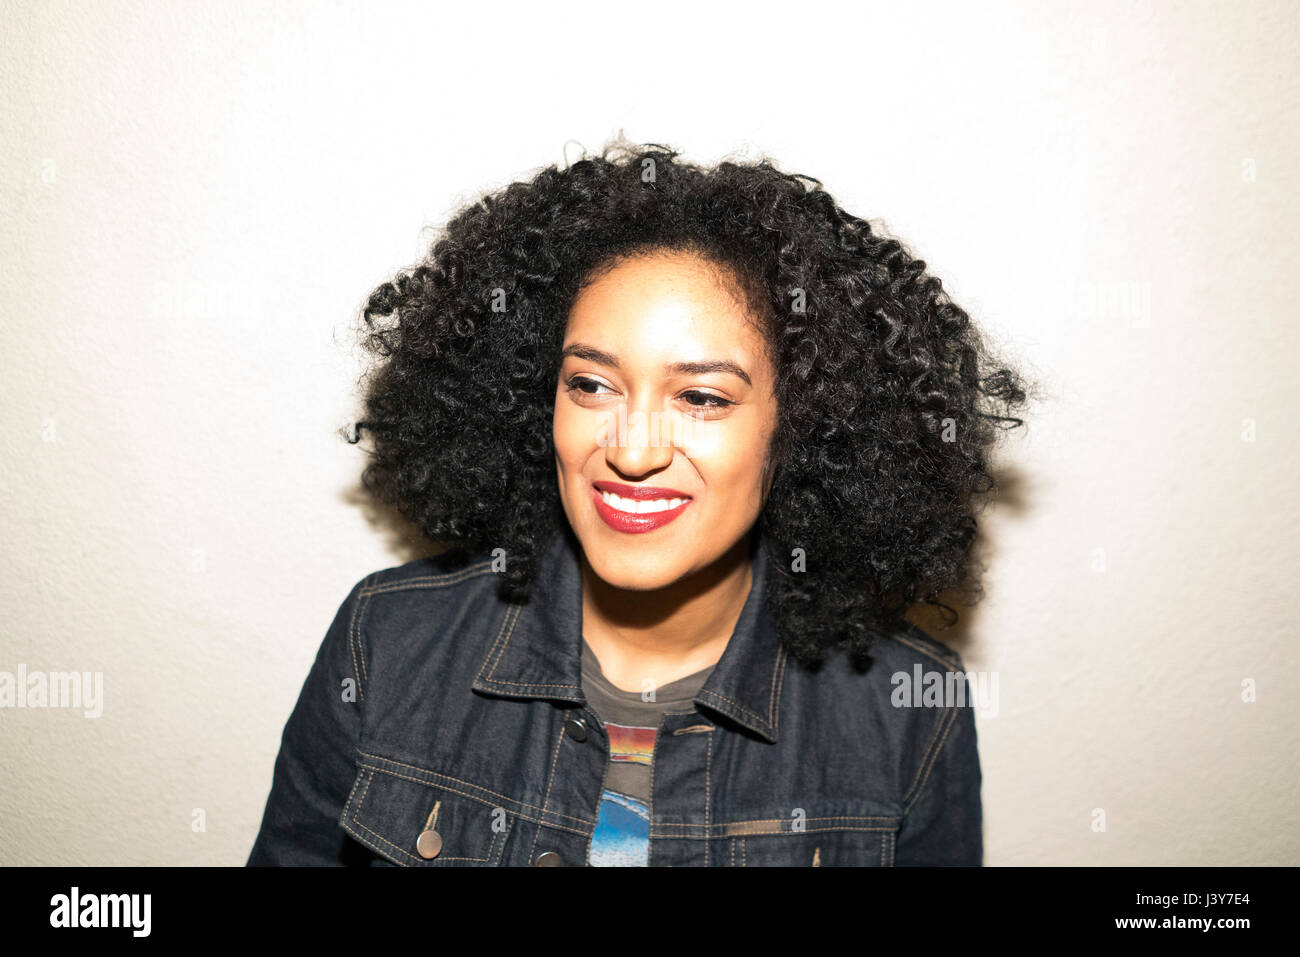 Portrait of curly haired woman looking away smiling Stock Photo